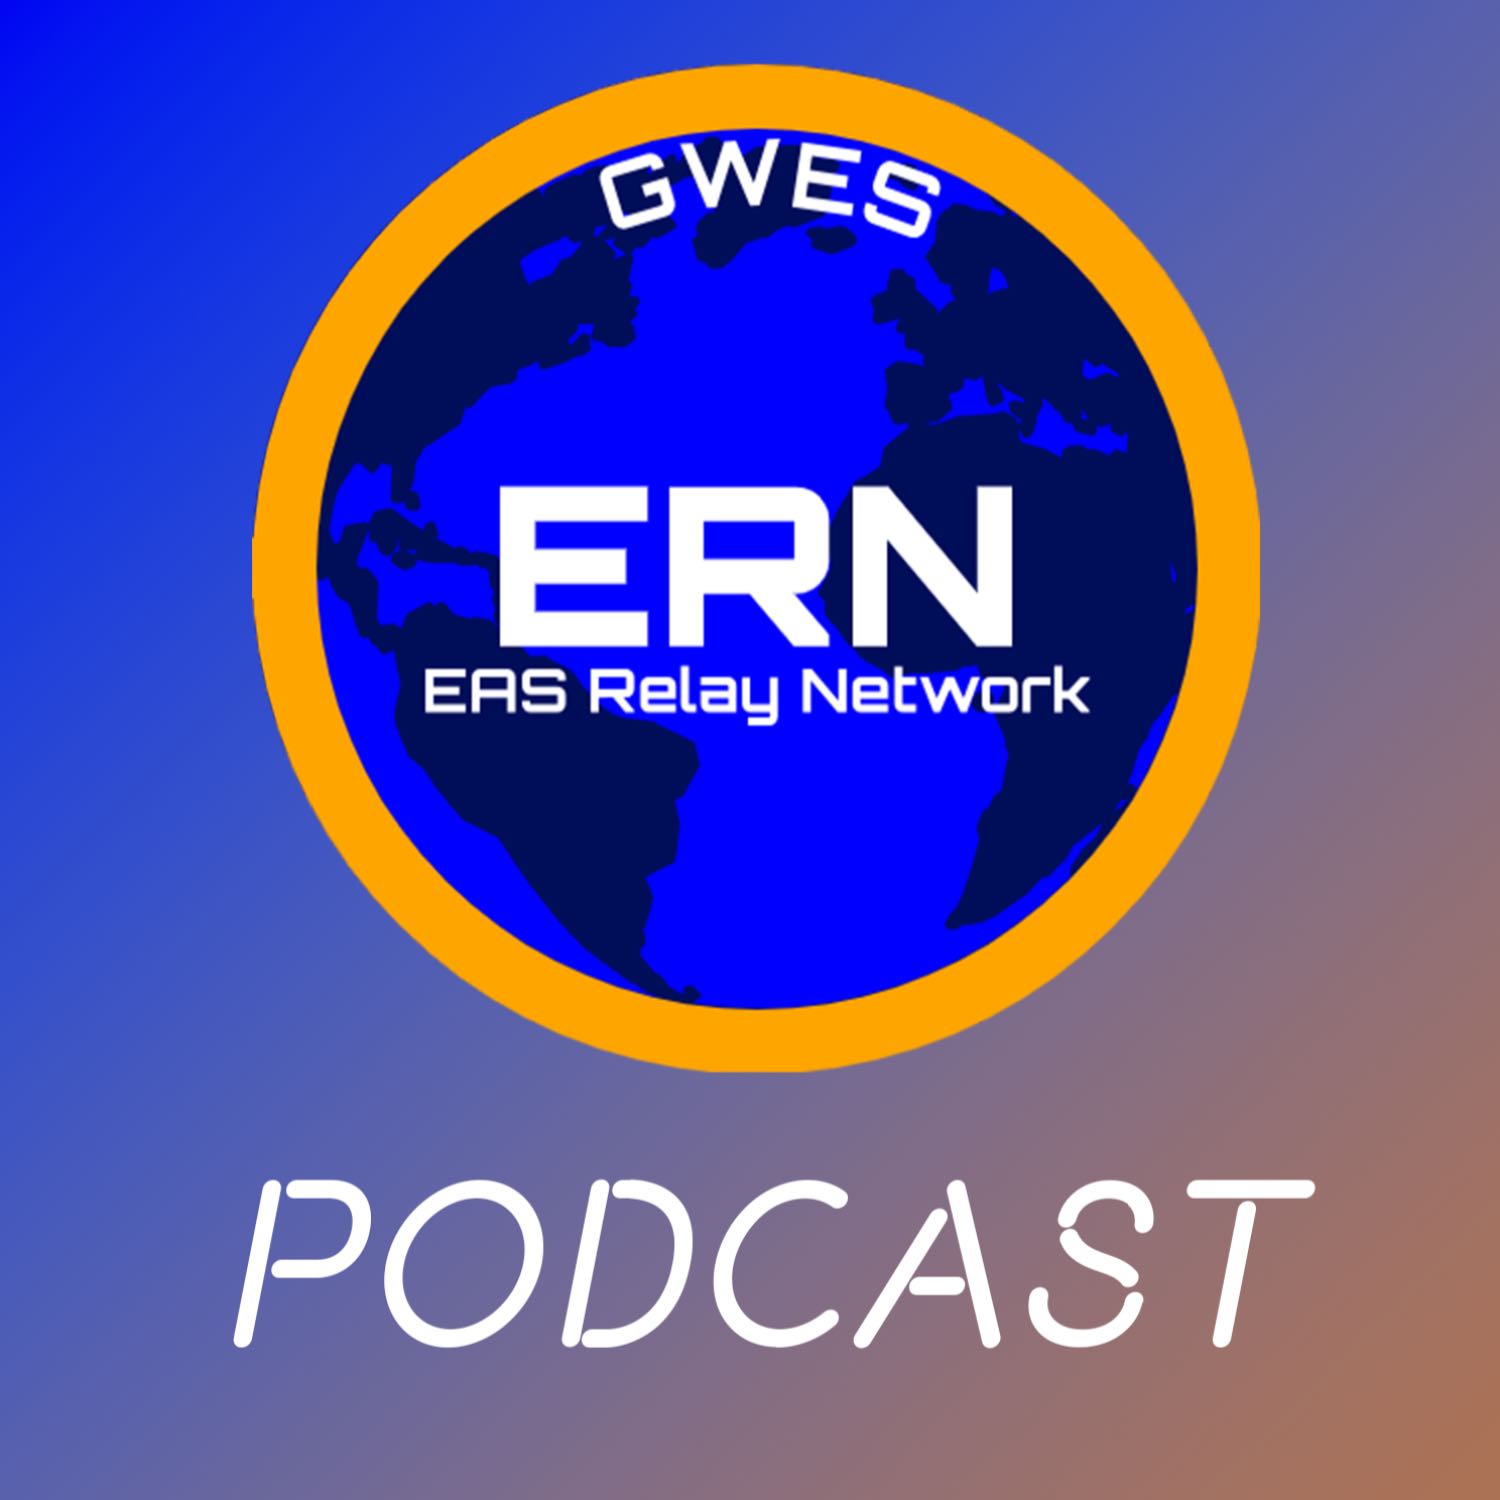 The GWES ERN Podcast